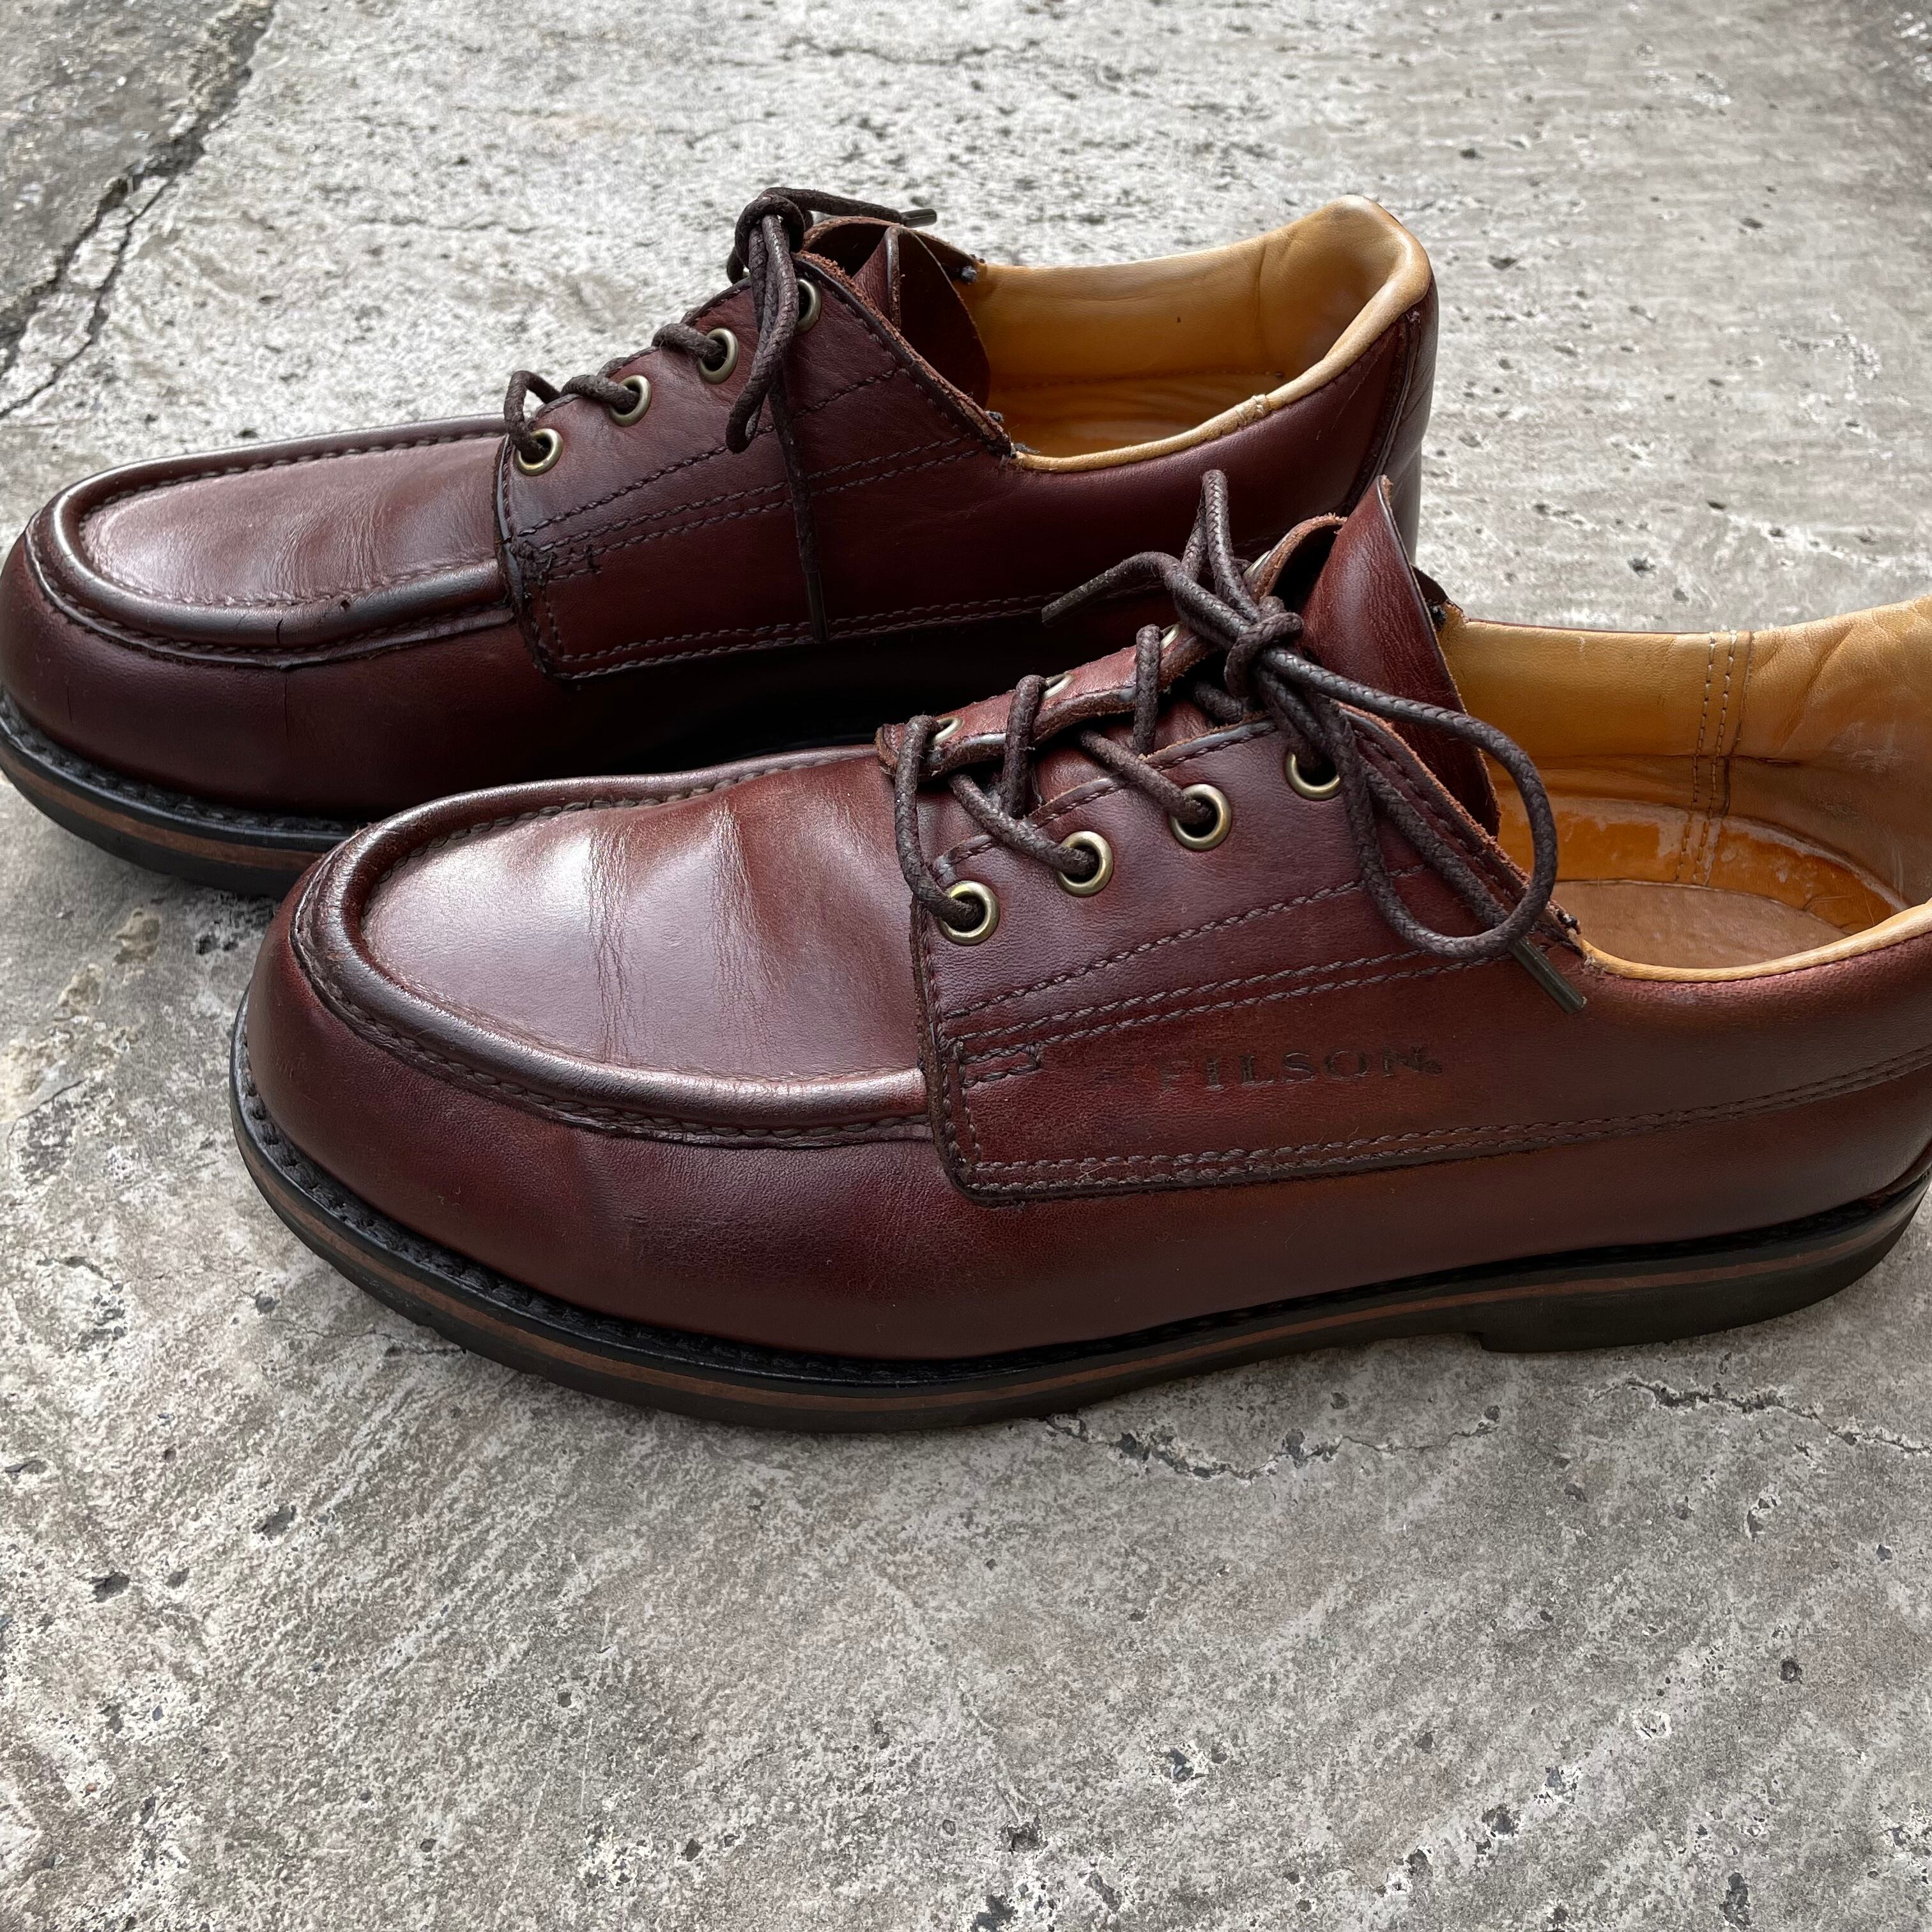 USED】vintage "FILSON" "Uplander Oxford" LEATHER SHOES | HEIGHTS Online Store